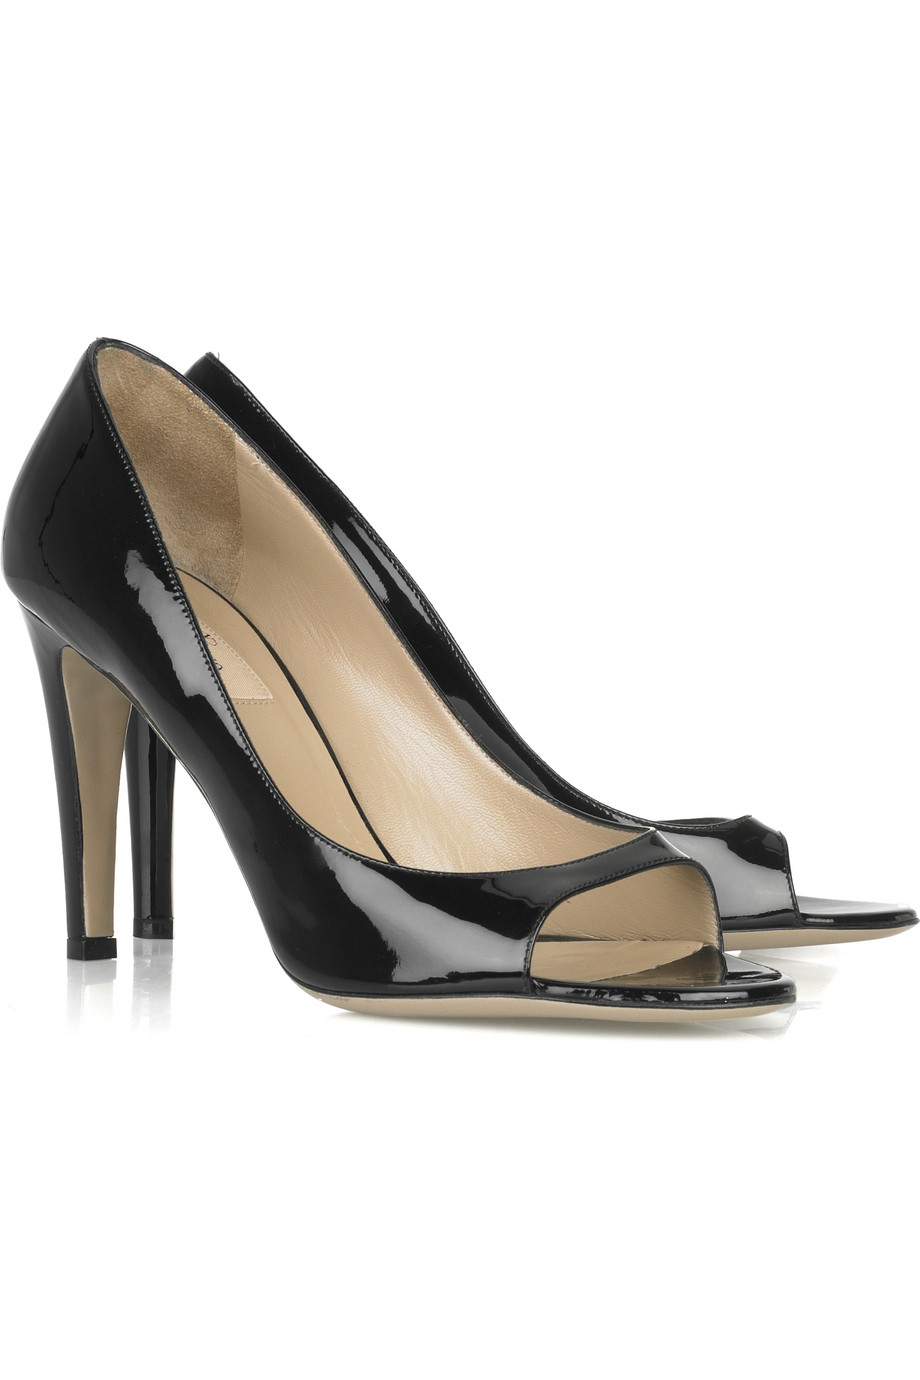 Valentino Patent-leather Open-toe Pumps in Black | Lyst